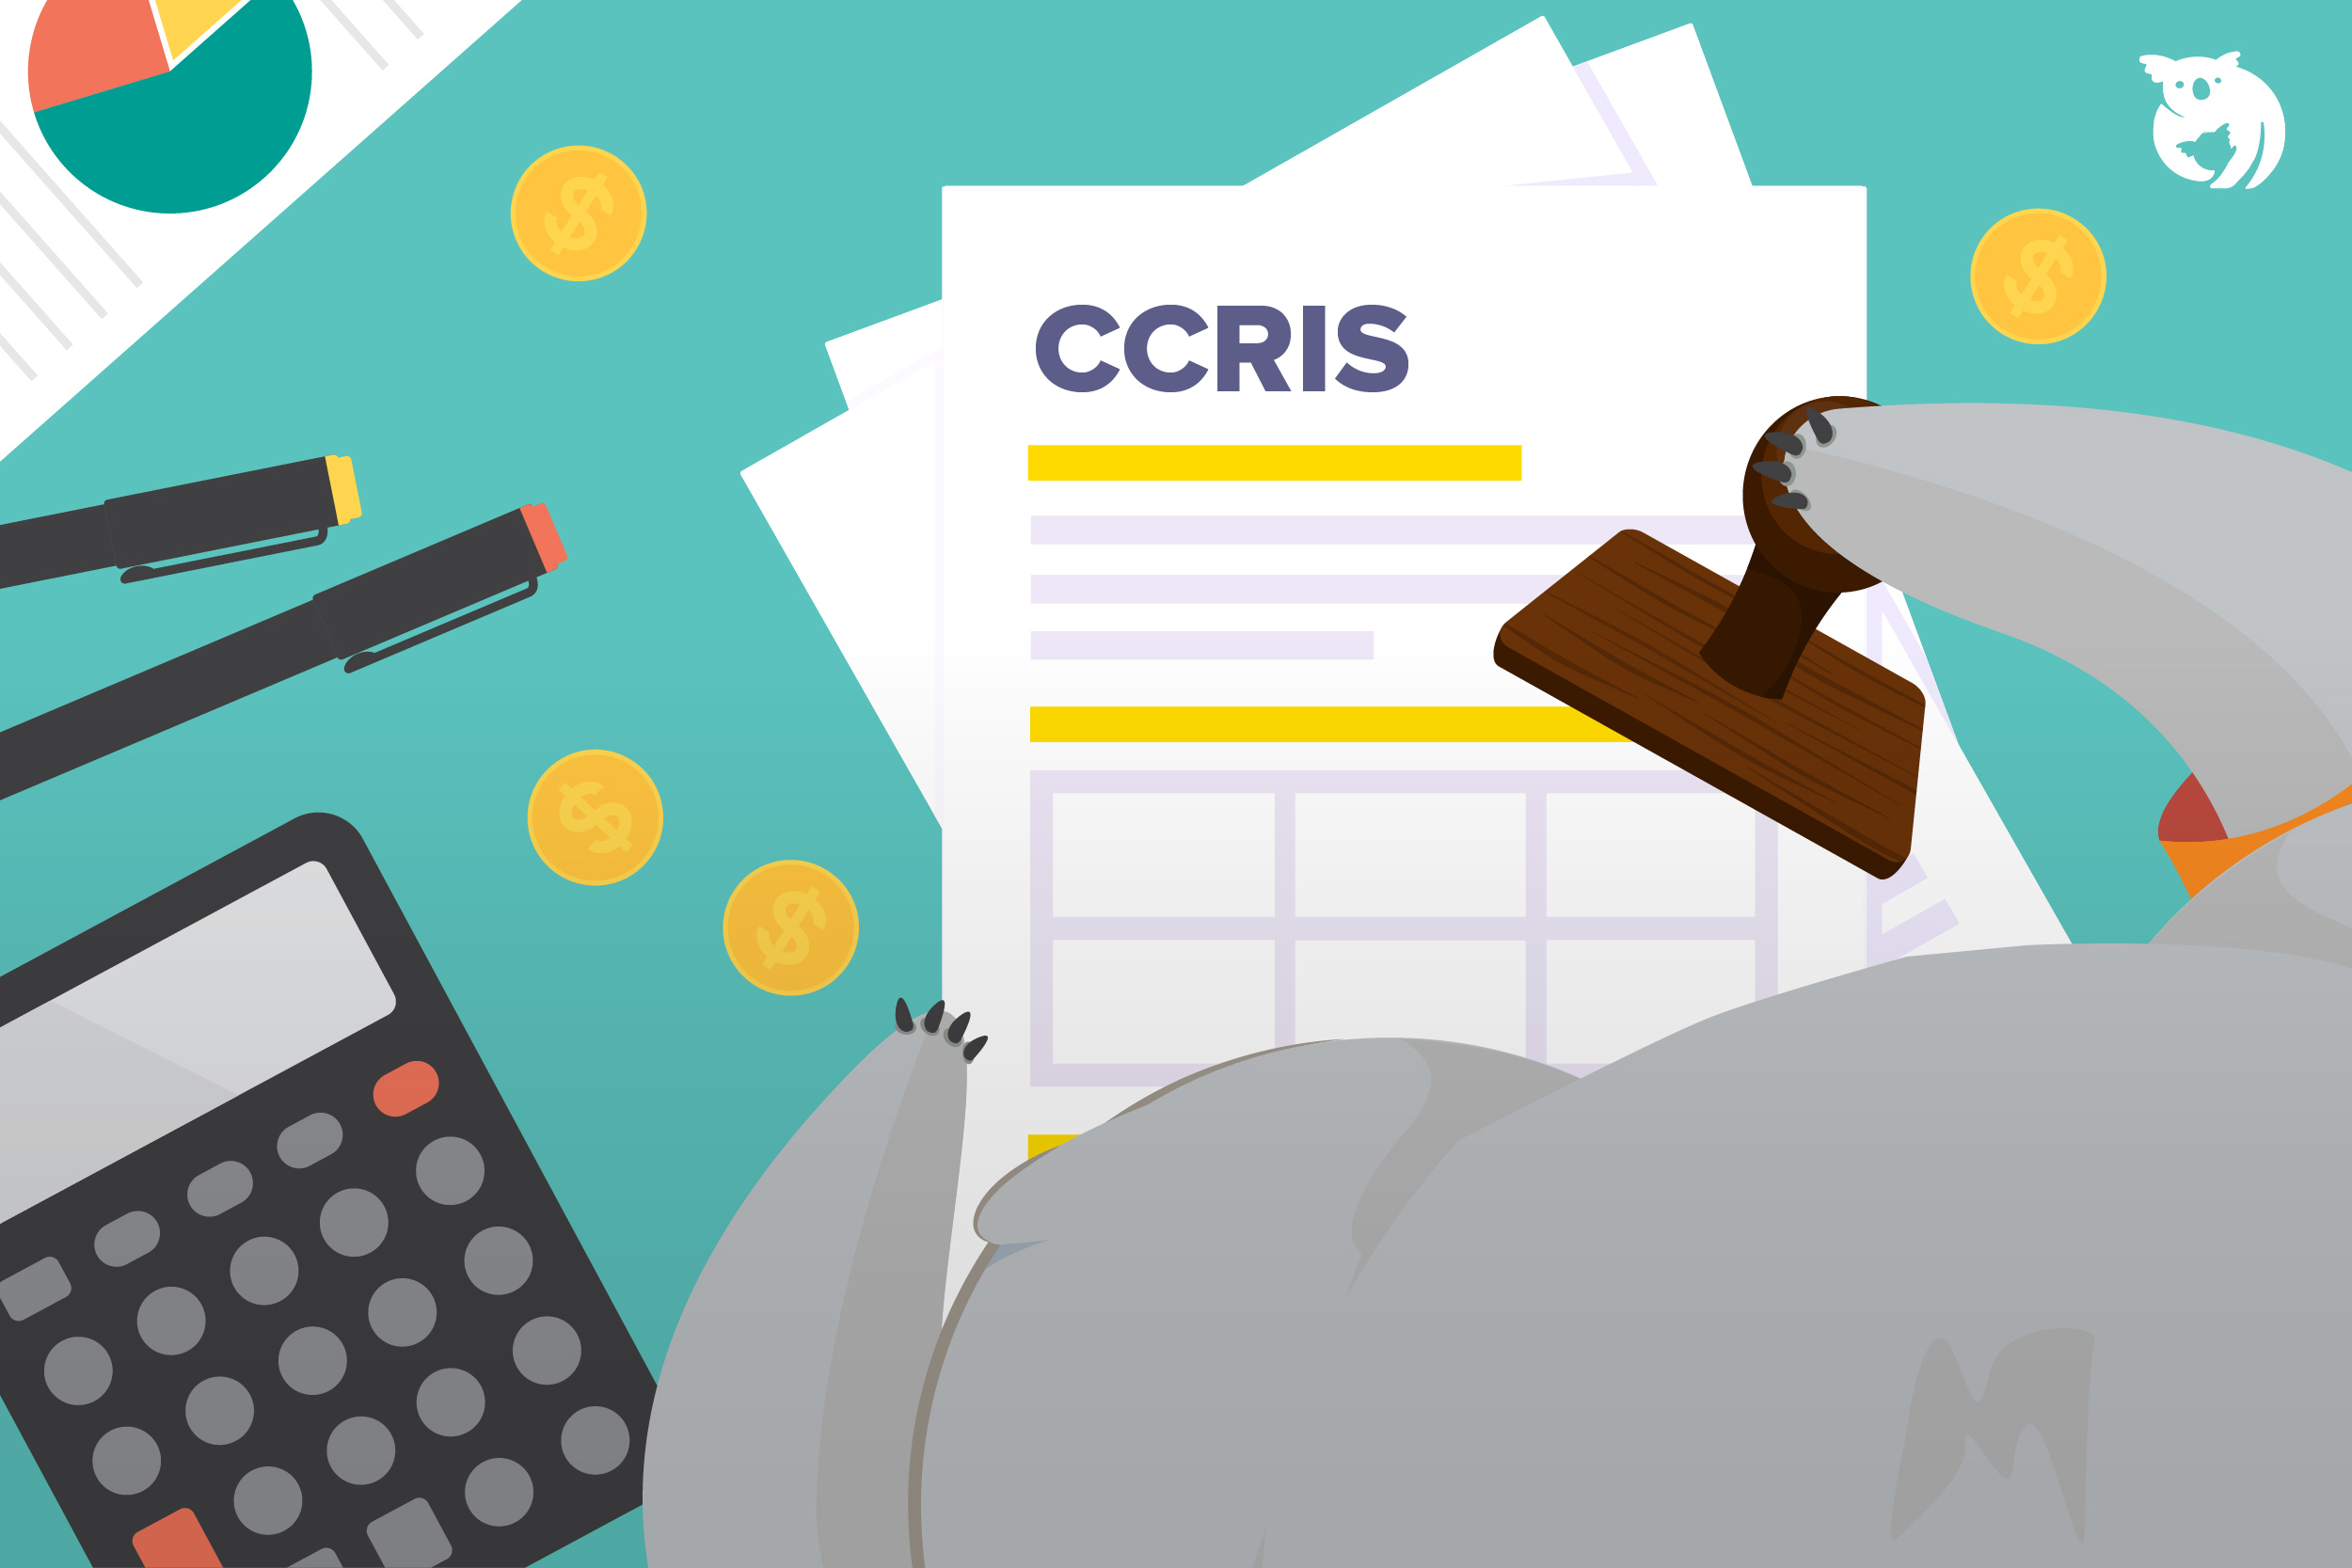 How to Check CCRIS Report Online?